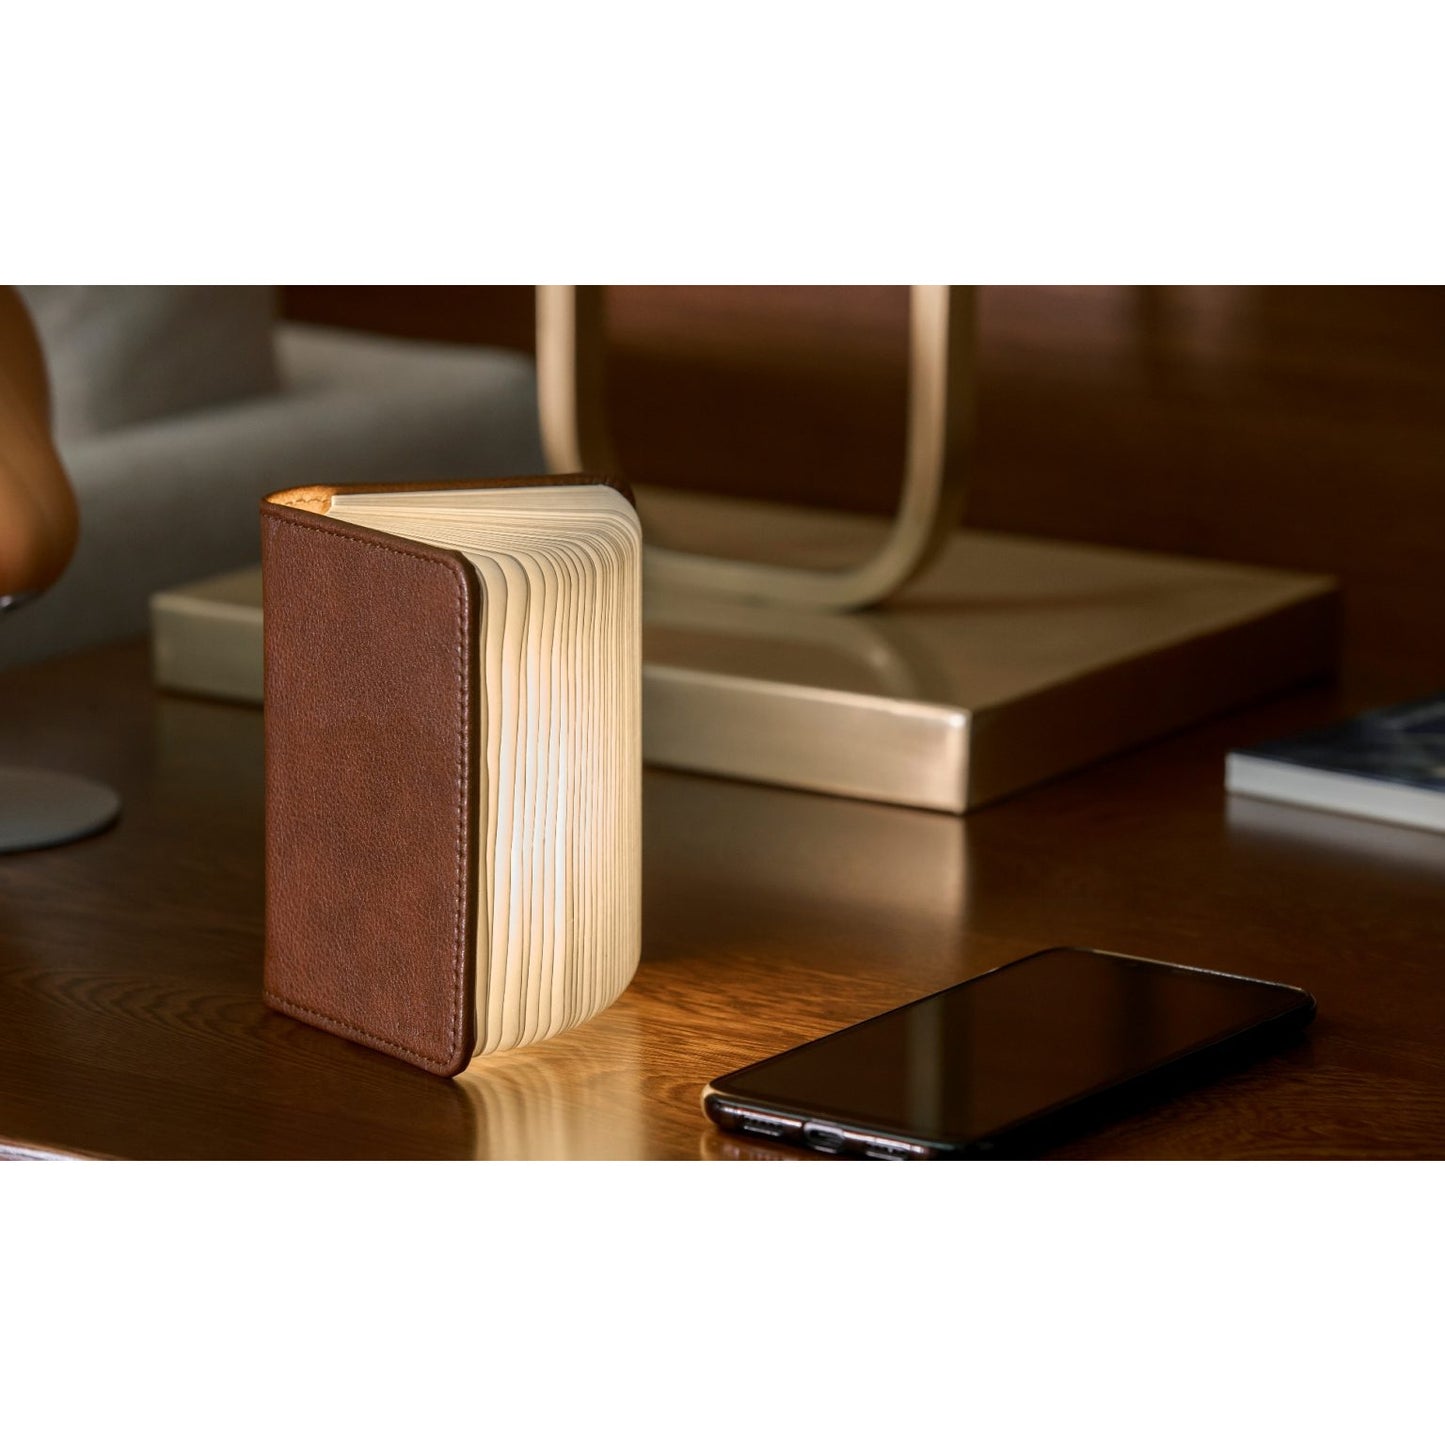 Smart Book Light - Brown Leather